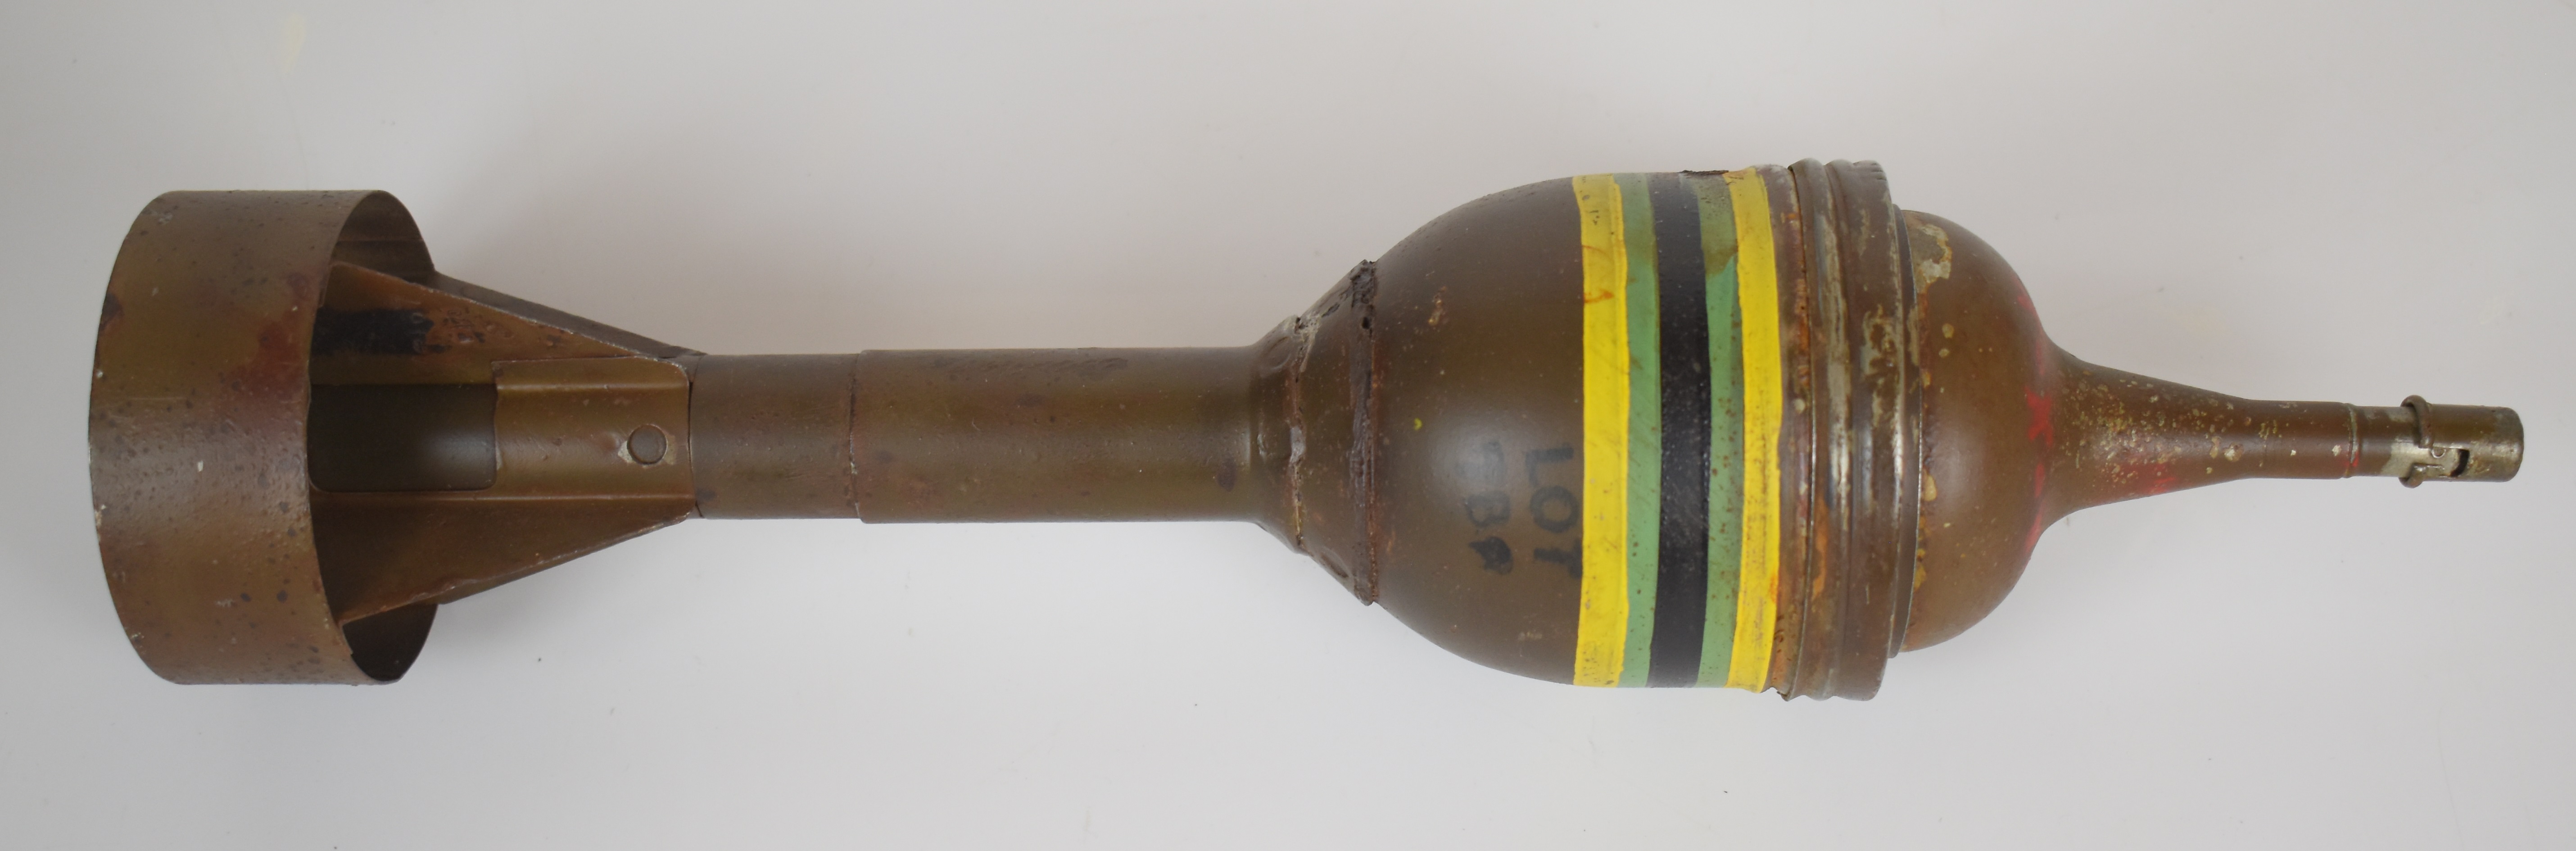 British WW2 PIAT (Projectile Infantry Anti Tank) inert round, ink stamped 3/43 / LOT 78 - Image 2 of 4